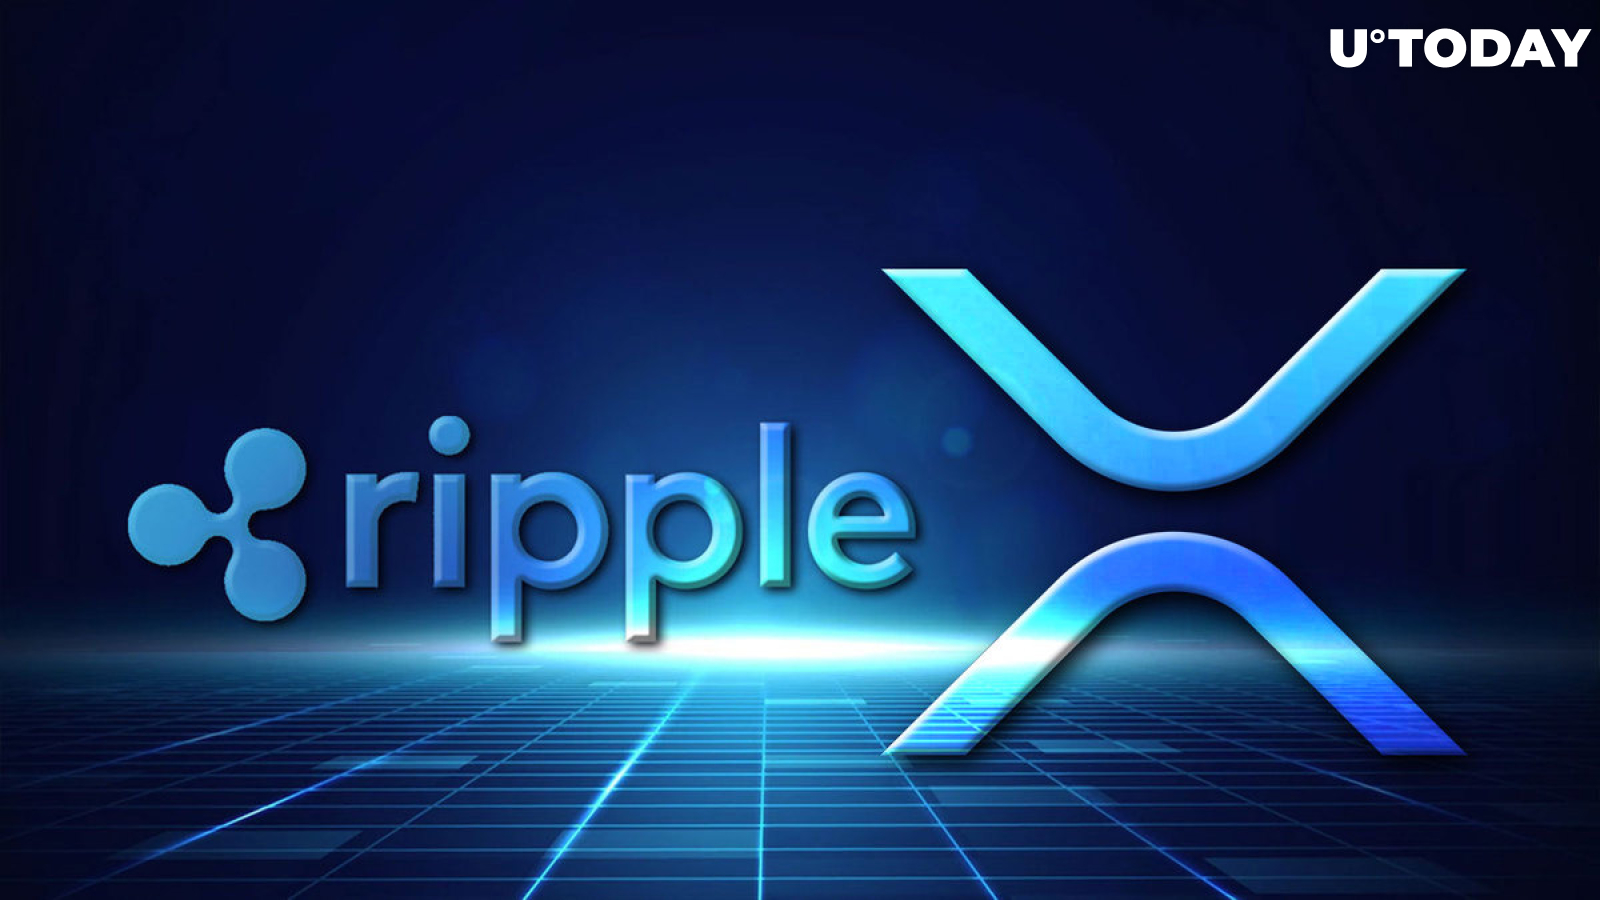 Ripple Sold $226 Million Worth of XRP in Q4, Here Are Other Key Insights